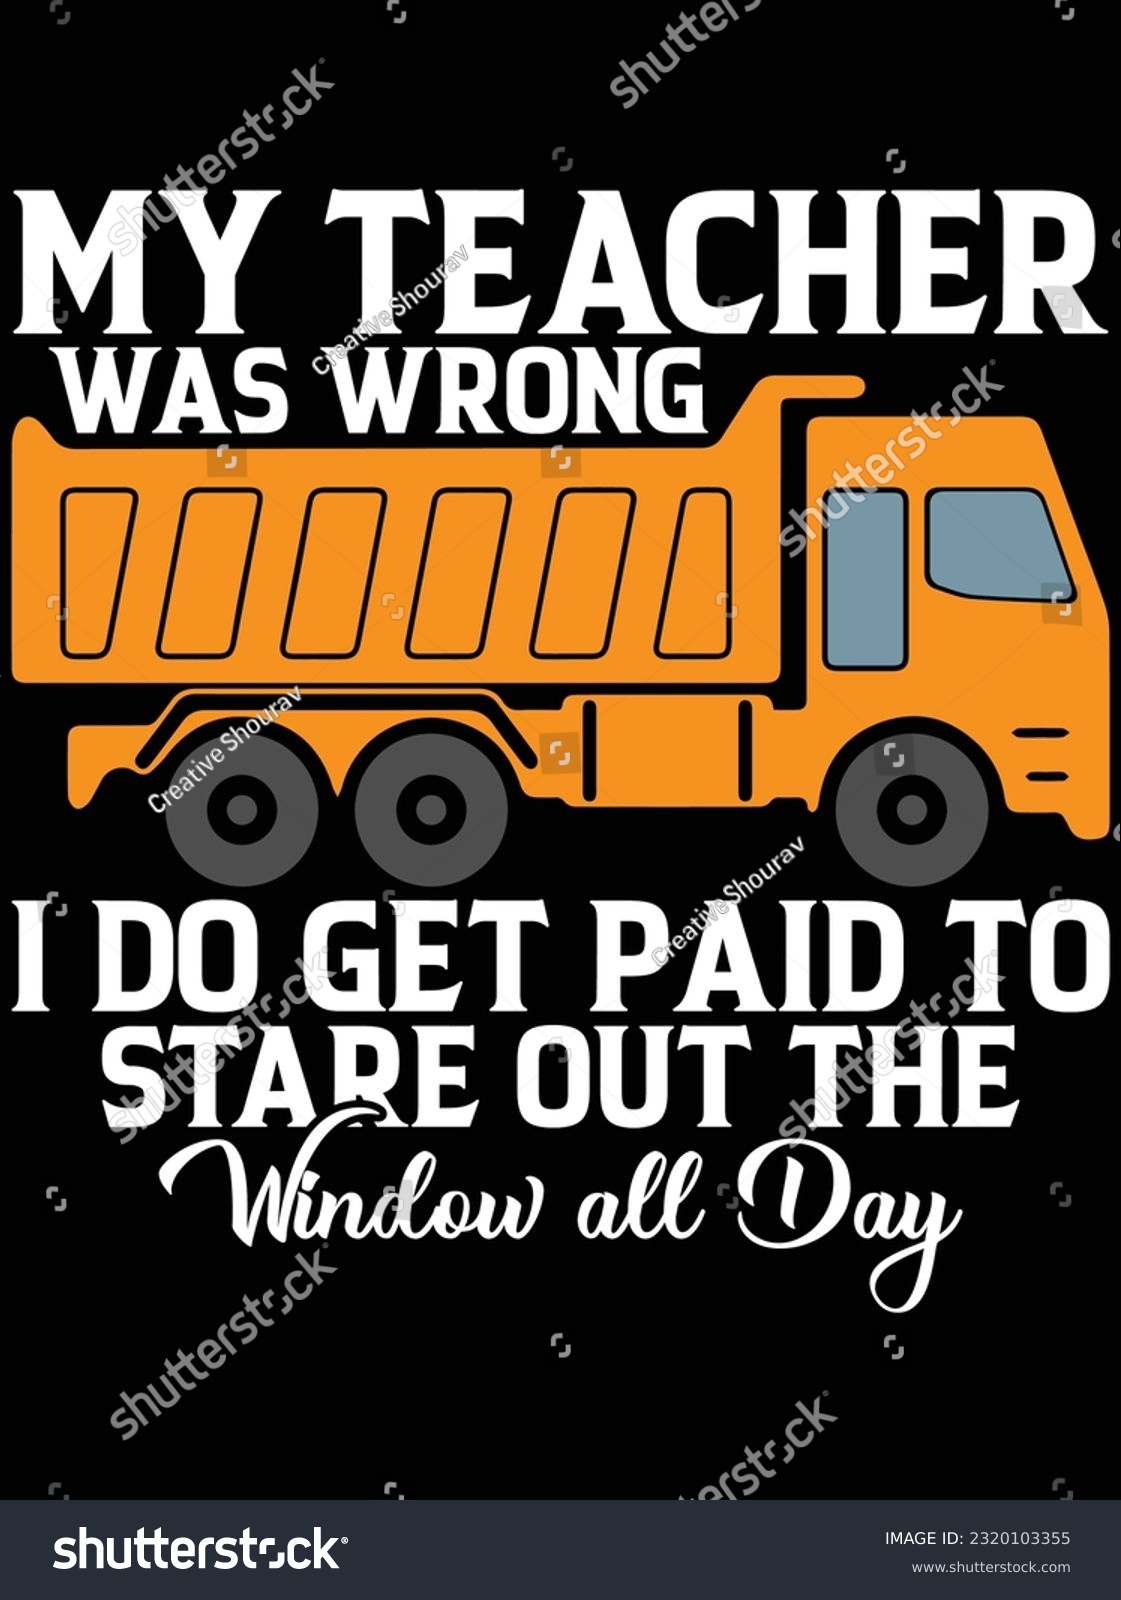 SVG of My teacher was wrong I do get paid to stare out the vector art design, eps file. design file for t-shirt. SVG, EPS cuttable design file svg